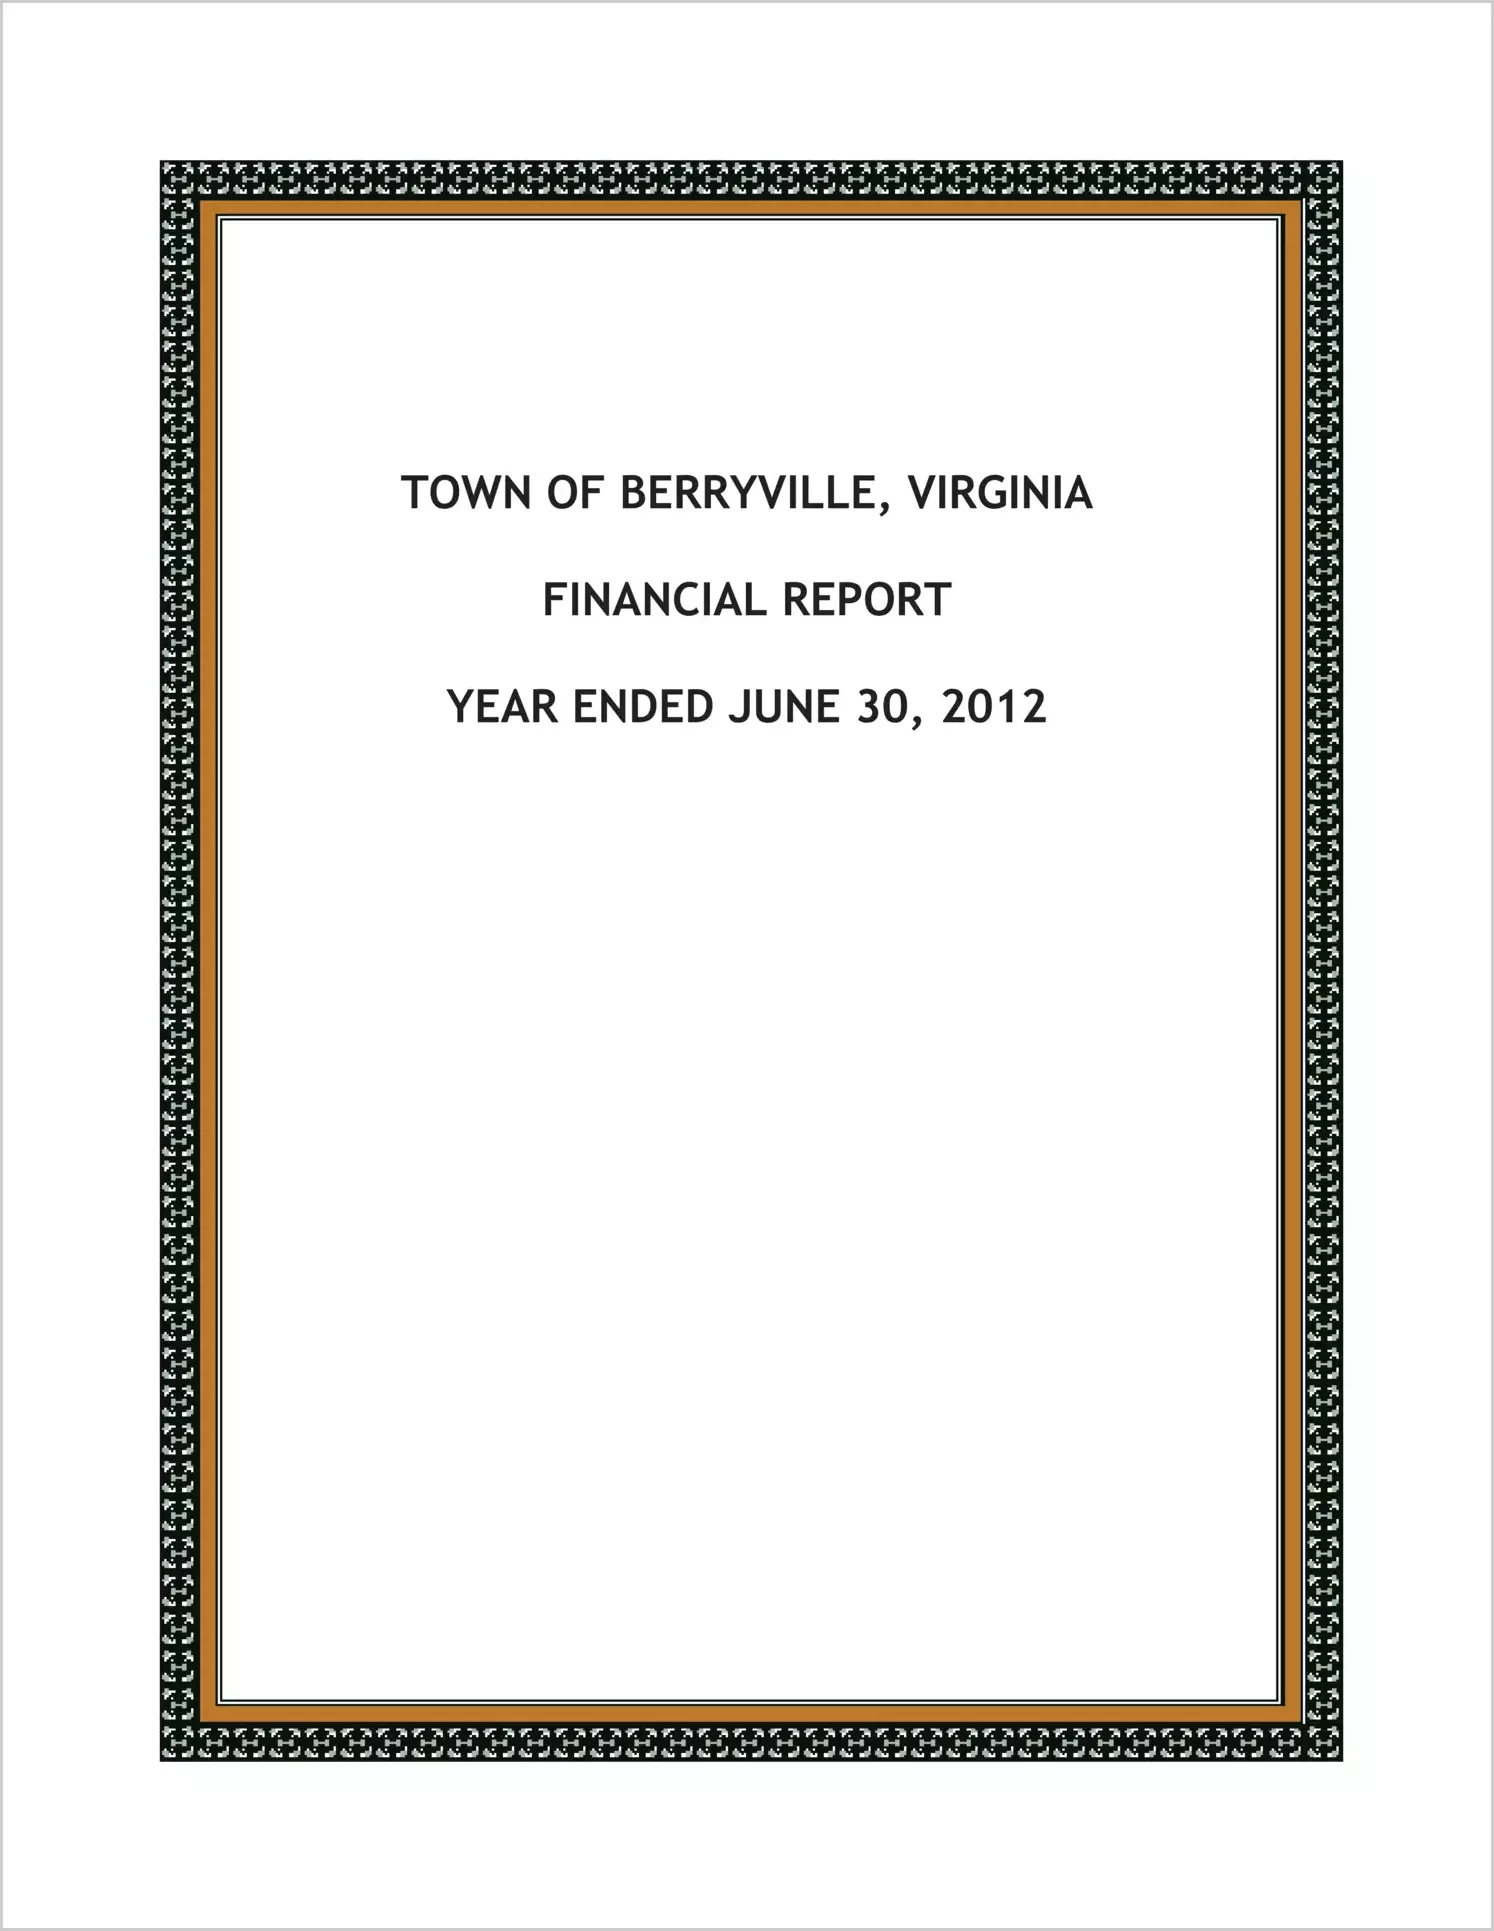 2012 Annual Financial Report for Town of Berryville